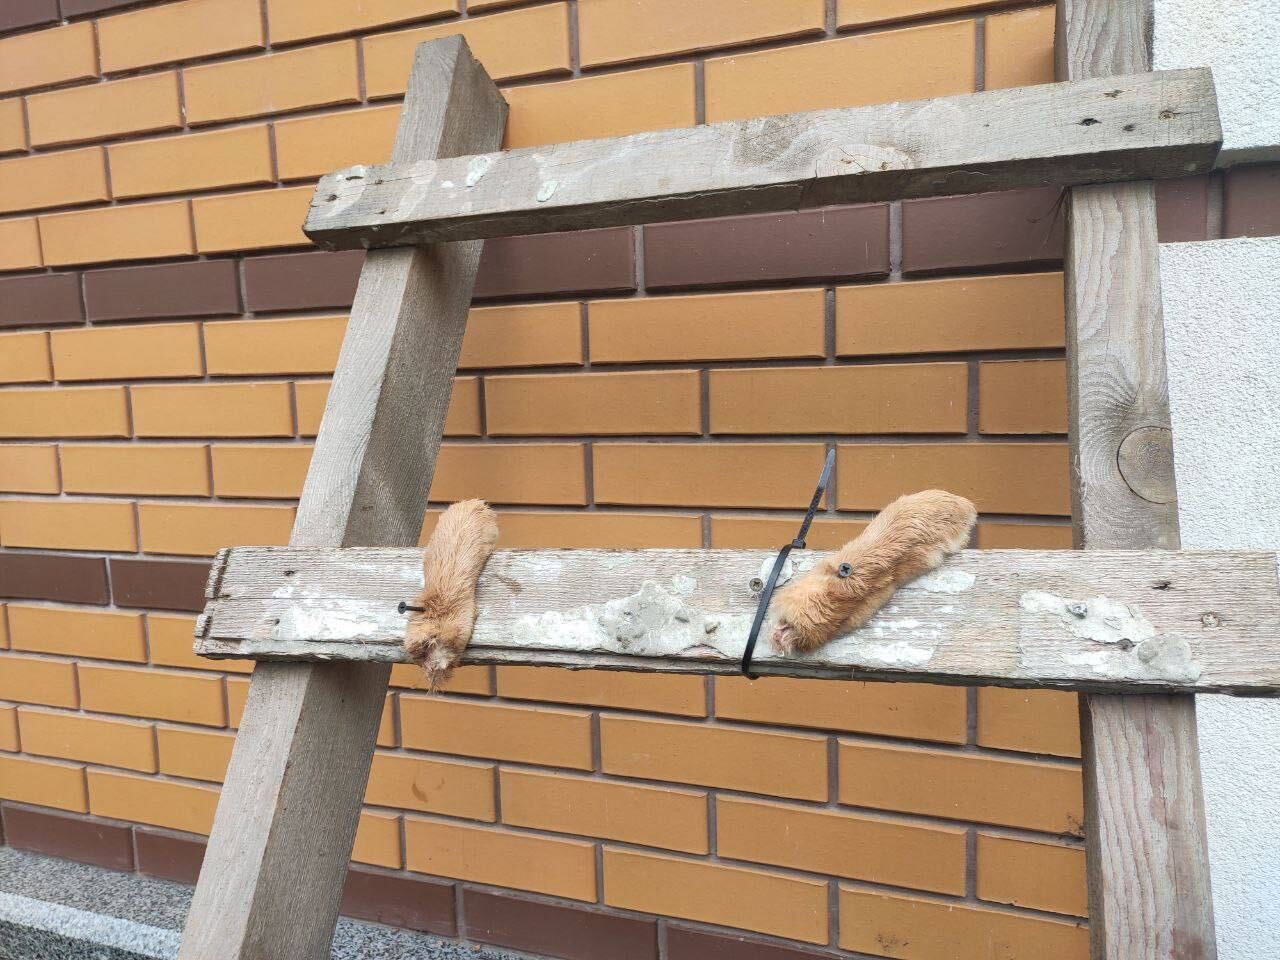 Nailed dog paws in the yard of one of the houses in Vorzel (Kyiv region)